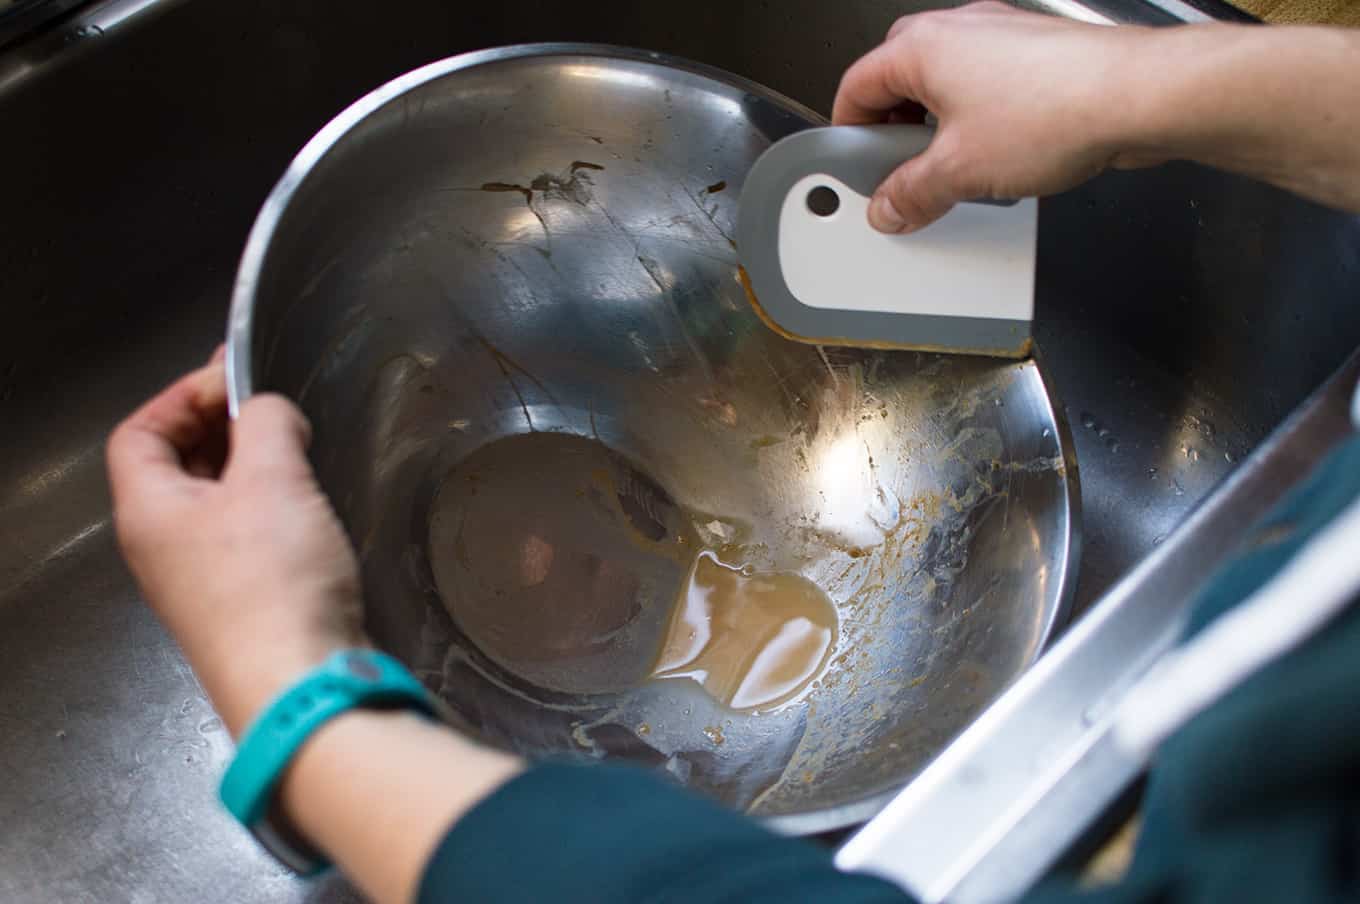 A person\'s hands holding and washing a dirty bowl with a dish squeegee.